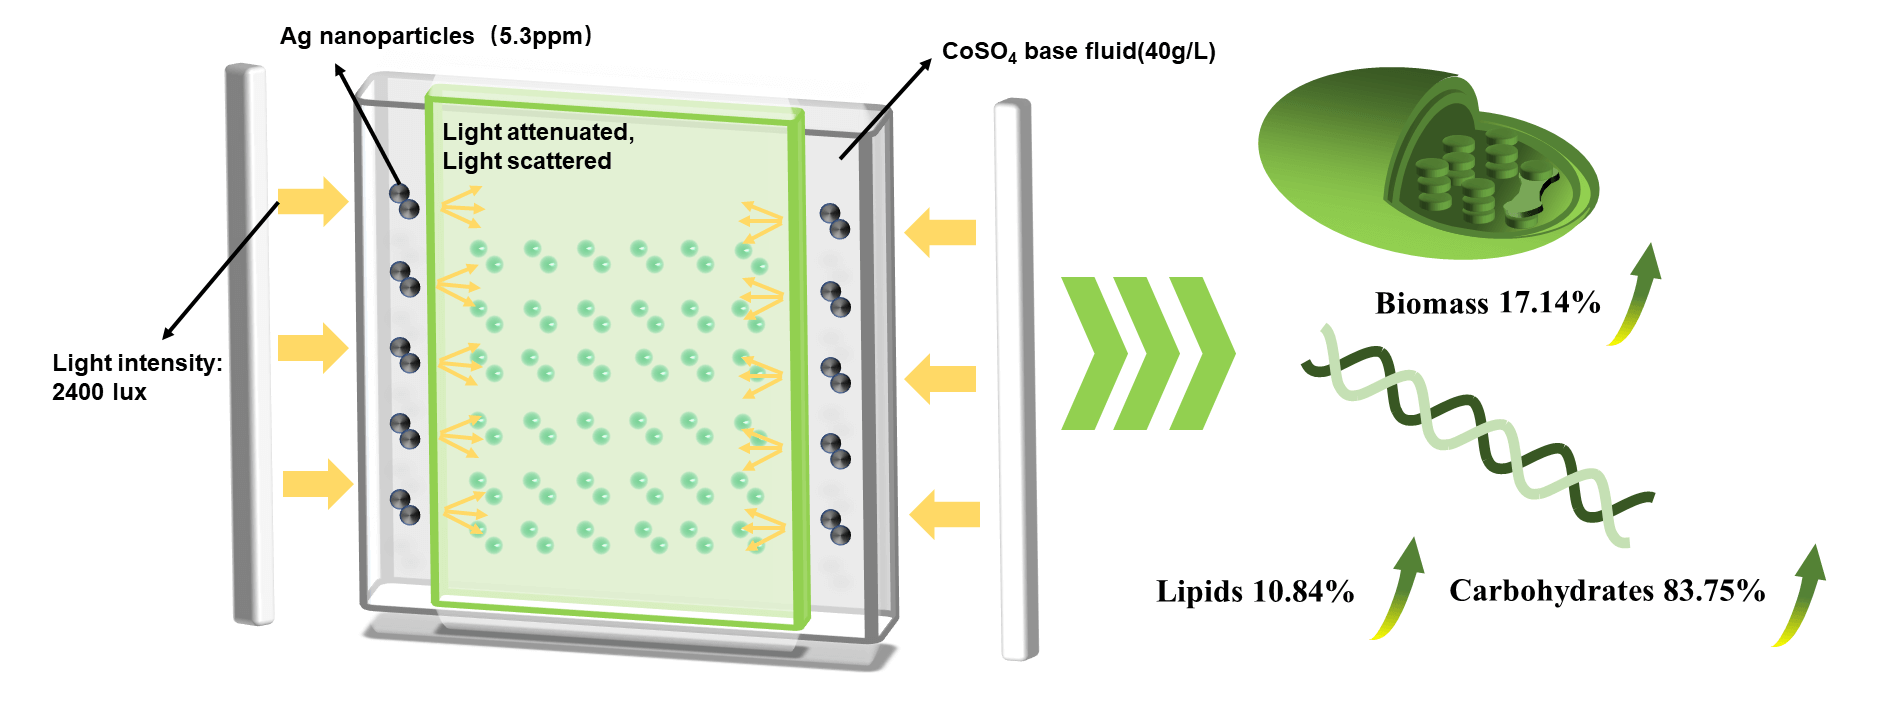 Experimental Study of Microalgae Cultivation under Selective Illumination by Ag/CoSO<sub>4</sub> for Bioelectrode Materials Preparation